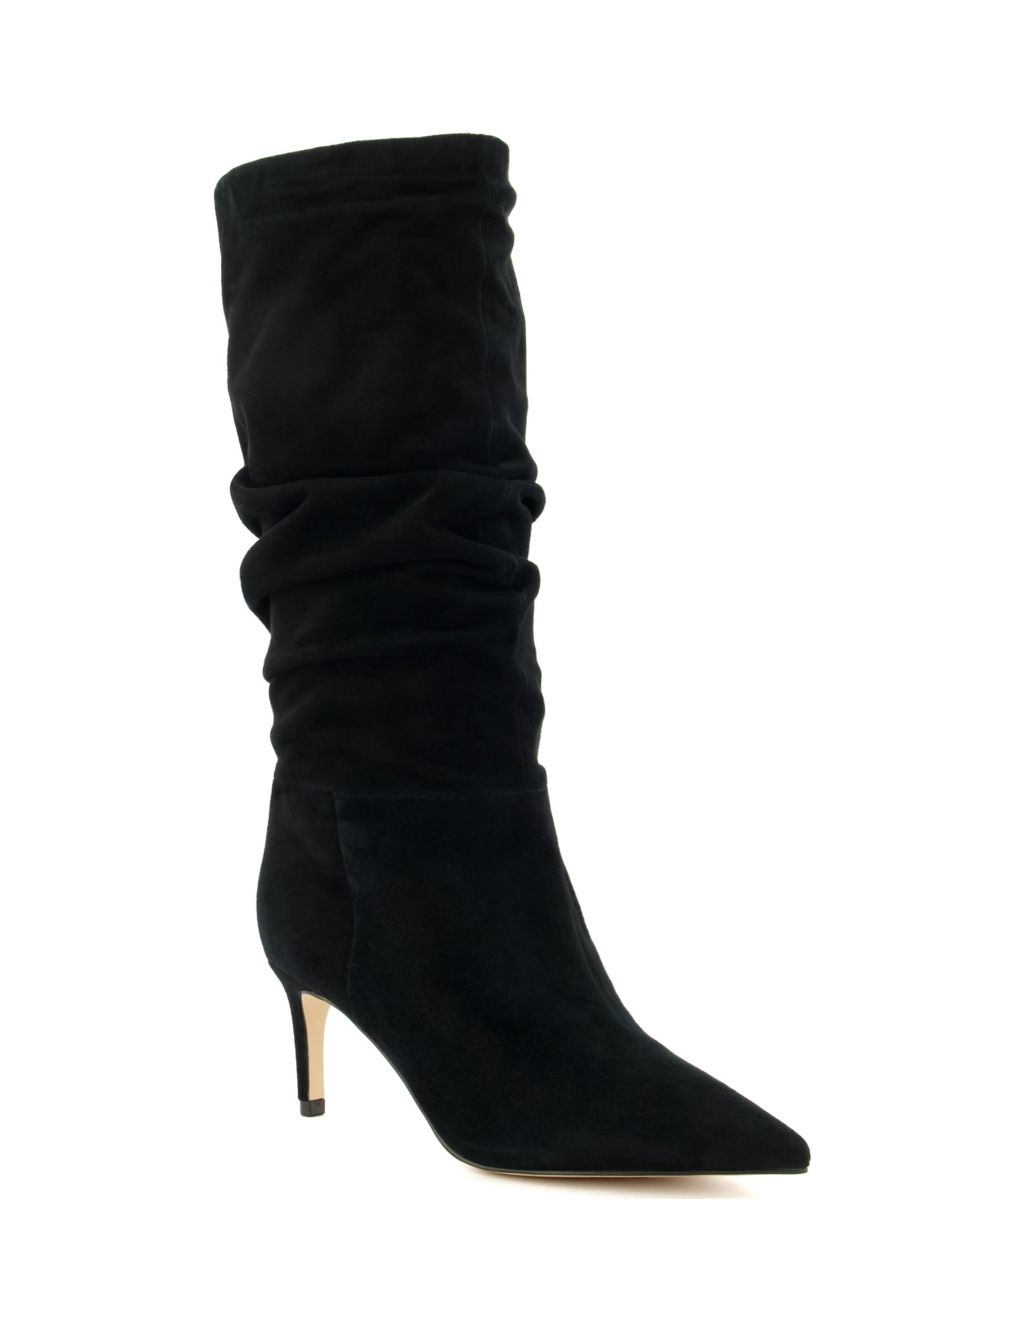 Suede Stiletto Heel Pointed Knee High Boots image 2